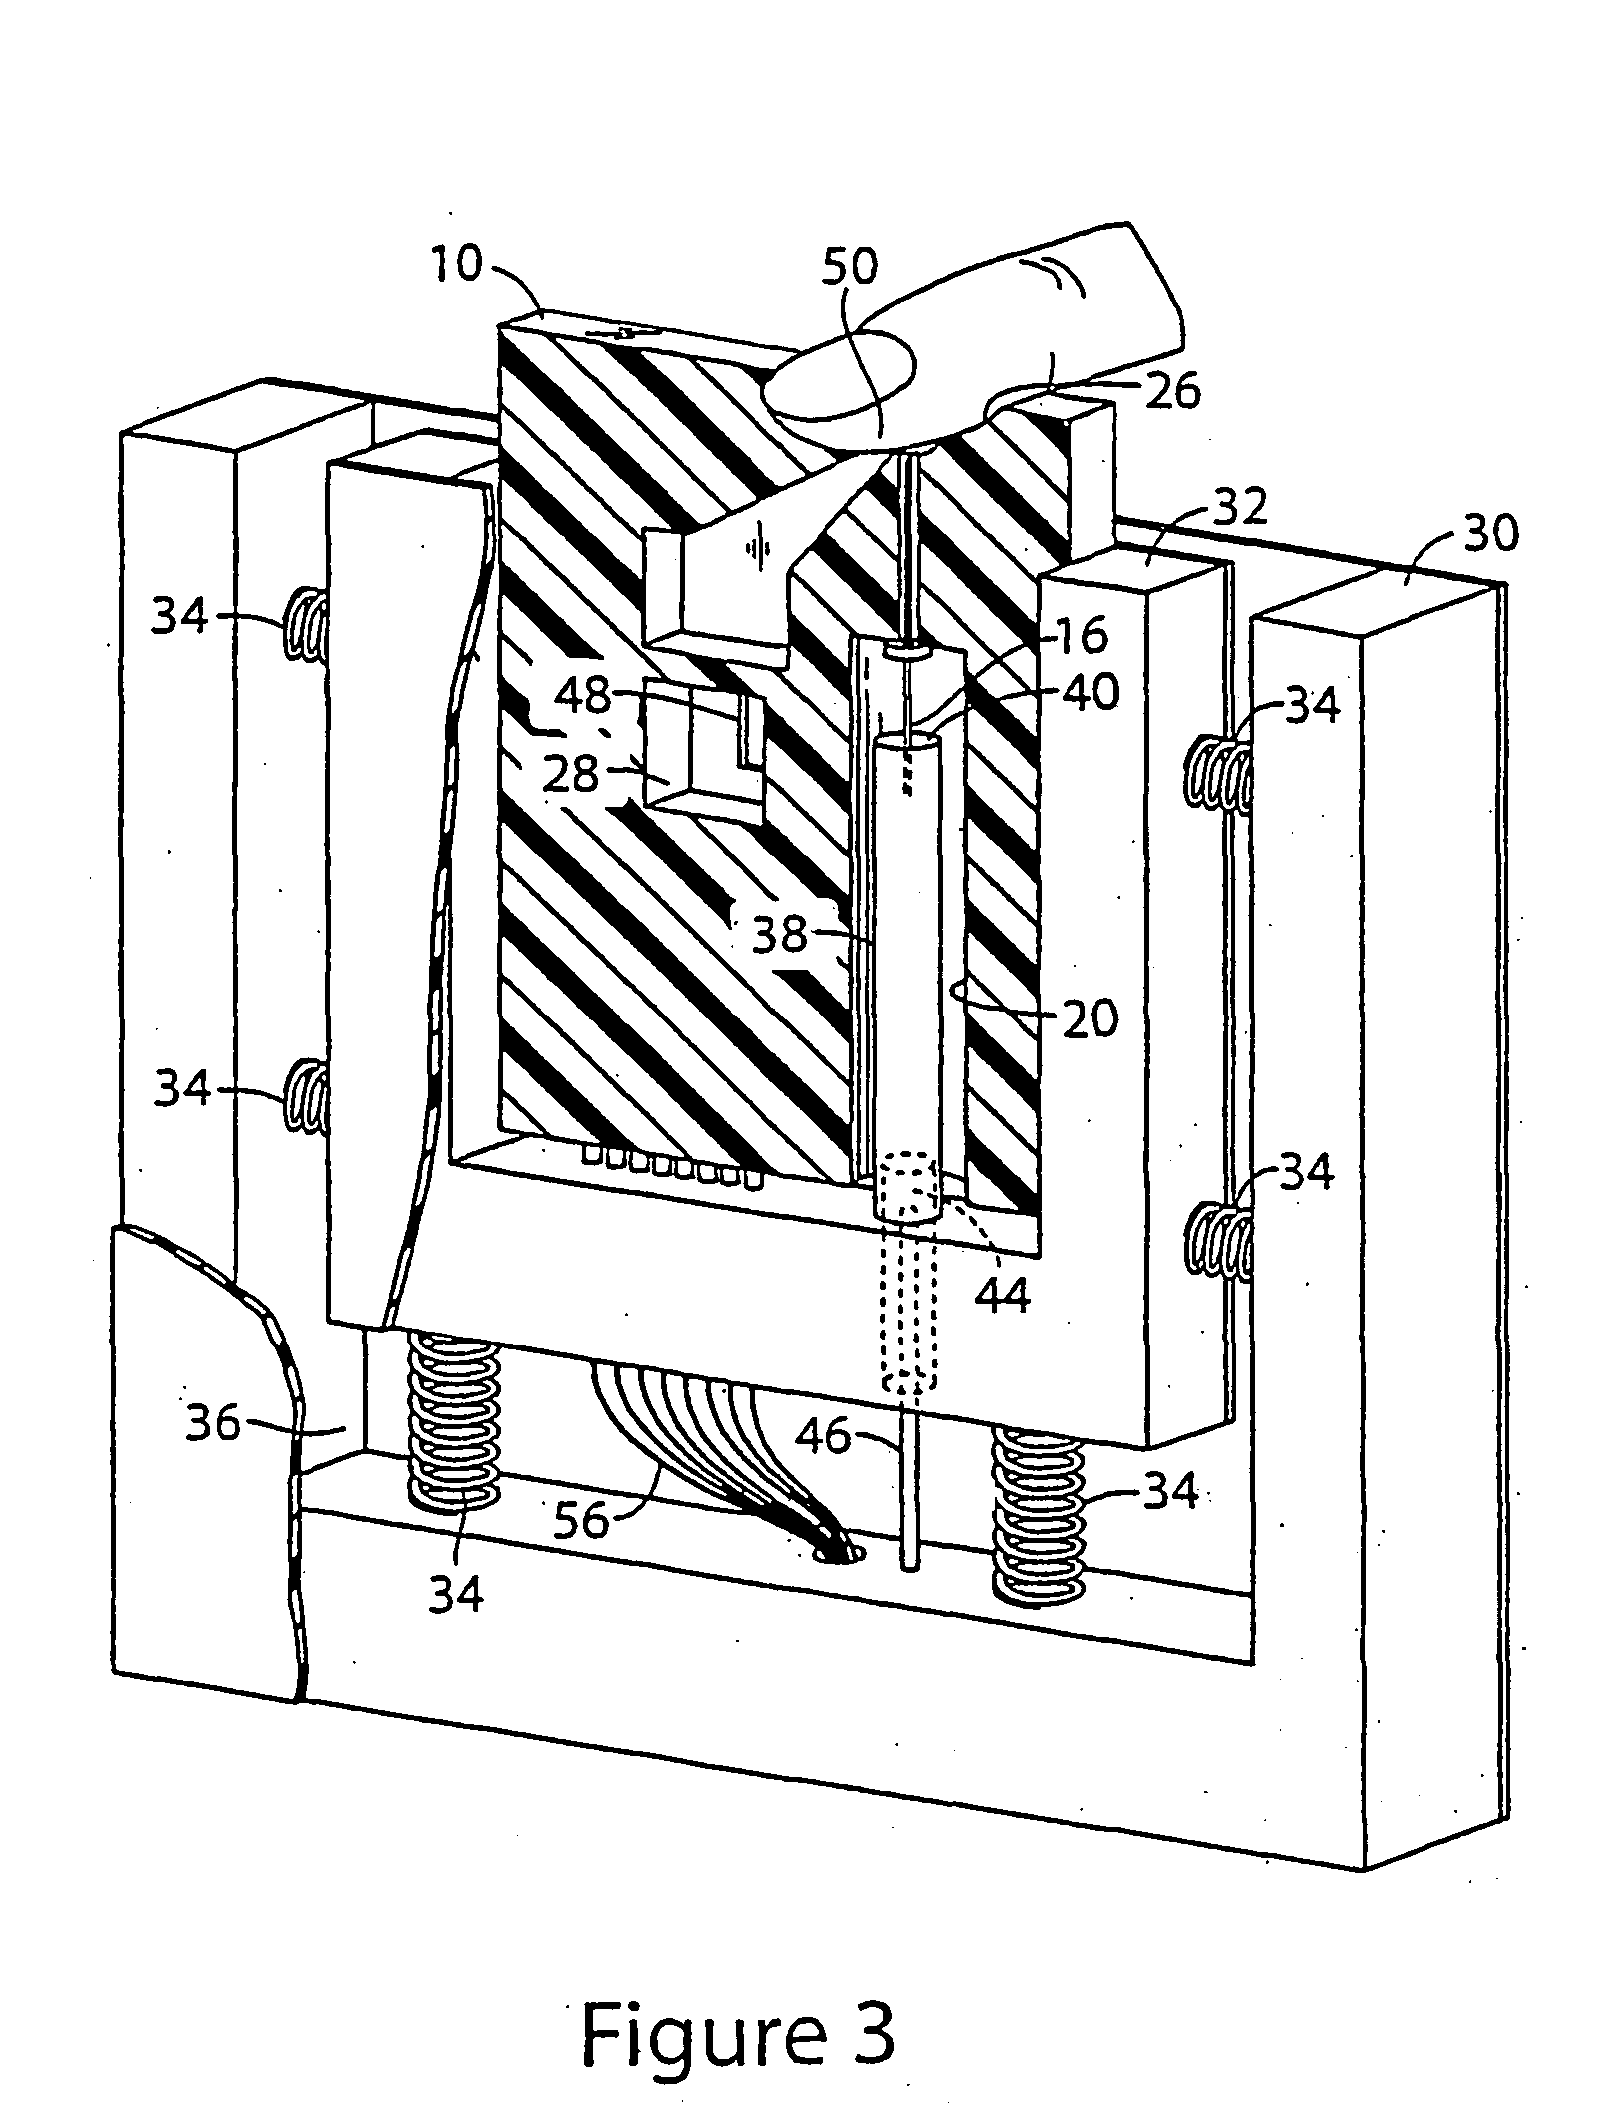 Method and apparatus for lancet launching device intergrated onto a blood-sampling cartridge